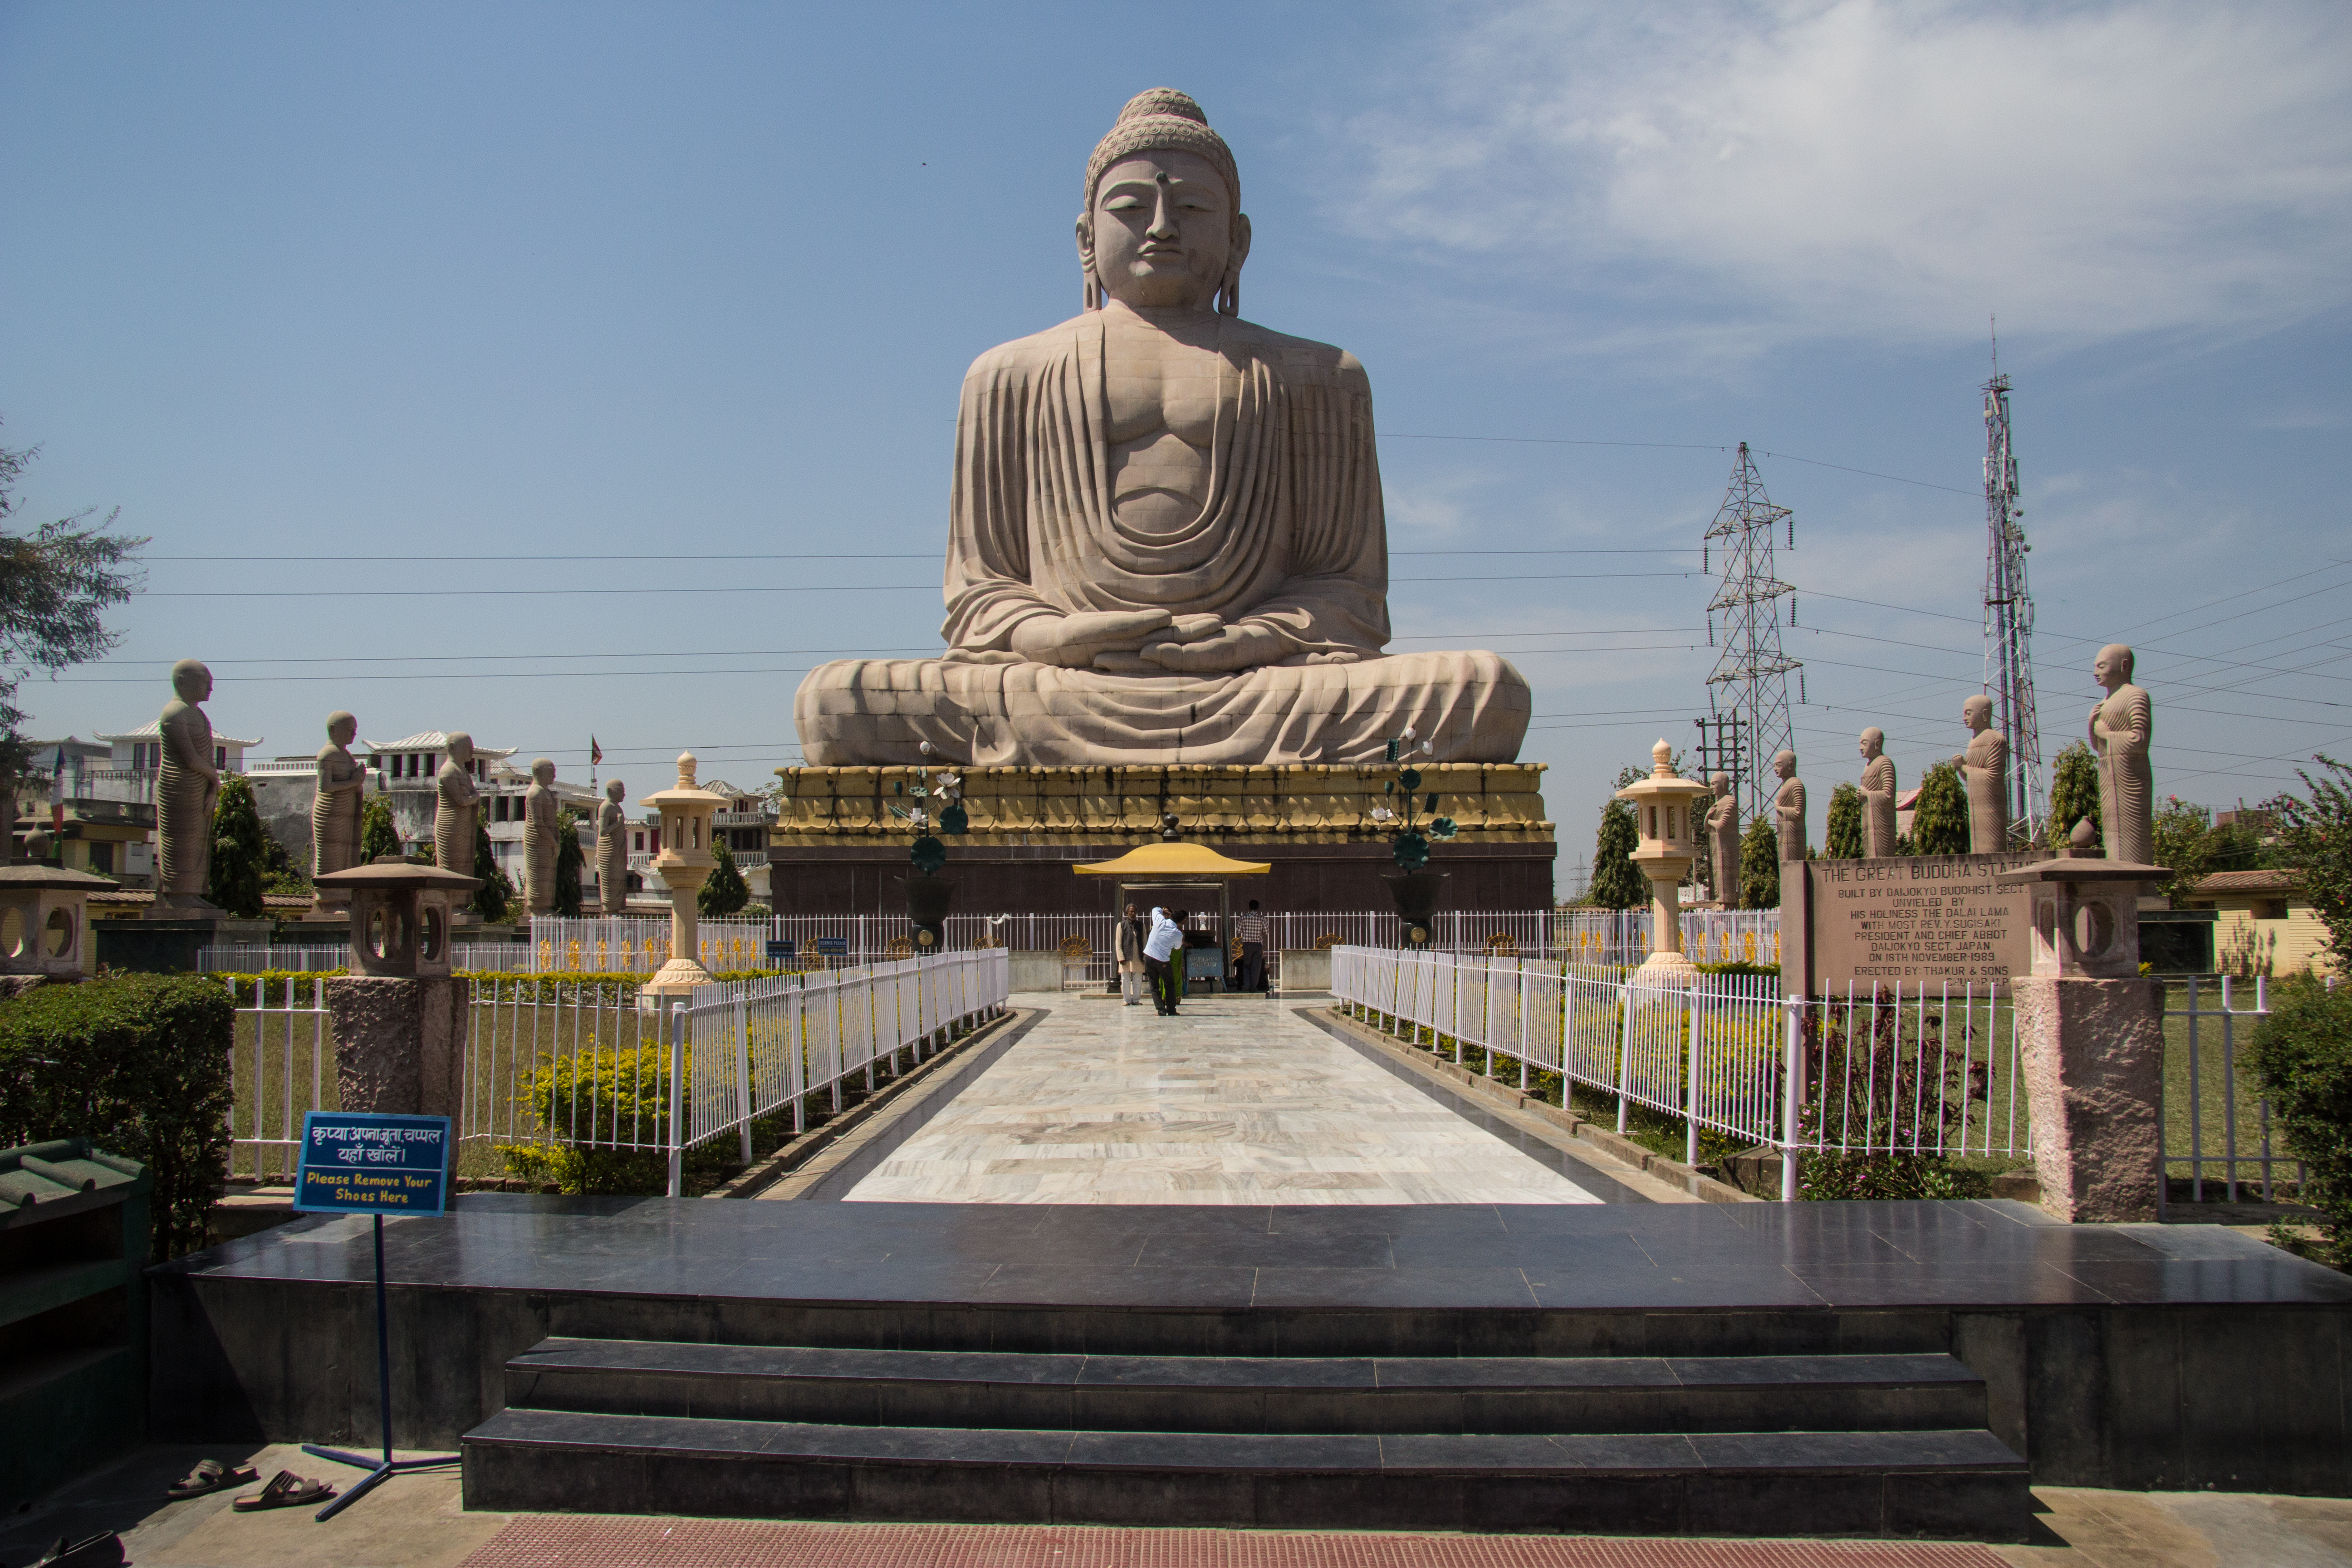 Bodh Gaya is a small town located in the state of Bihar, India